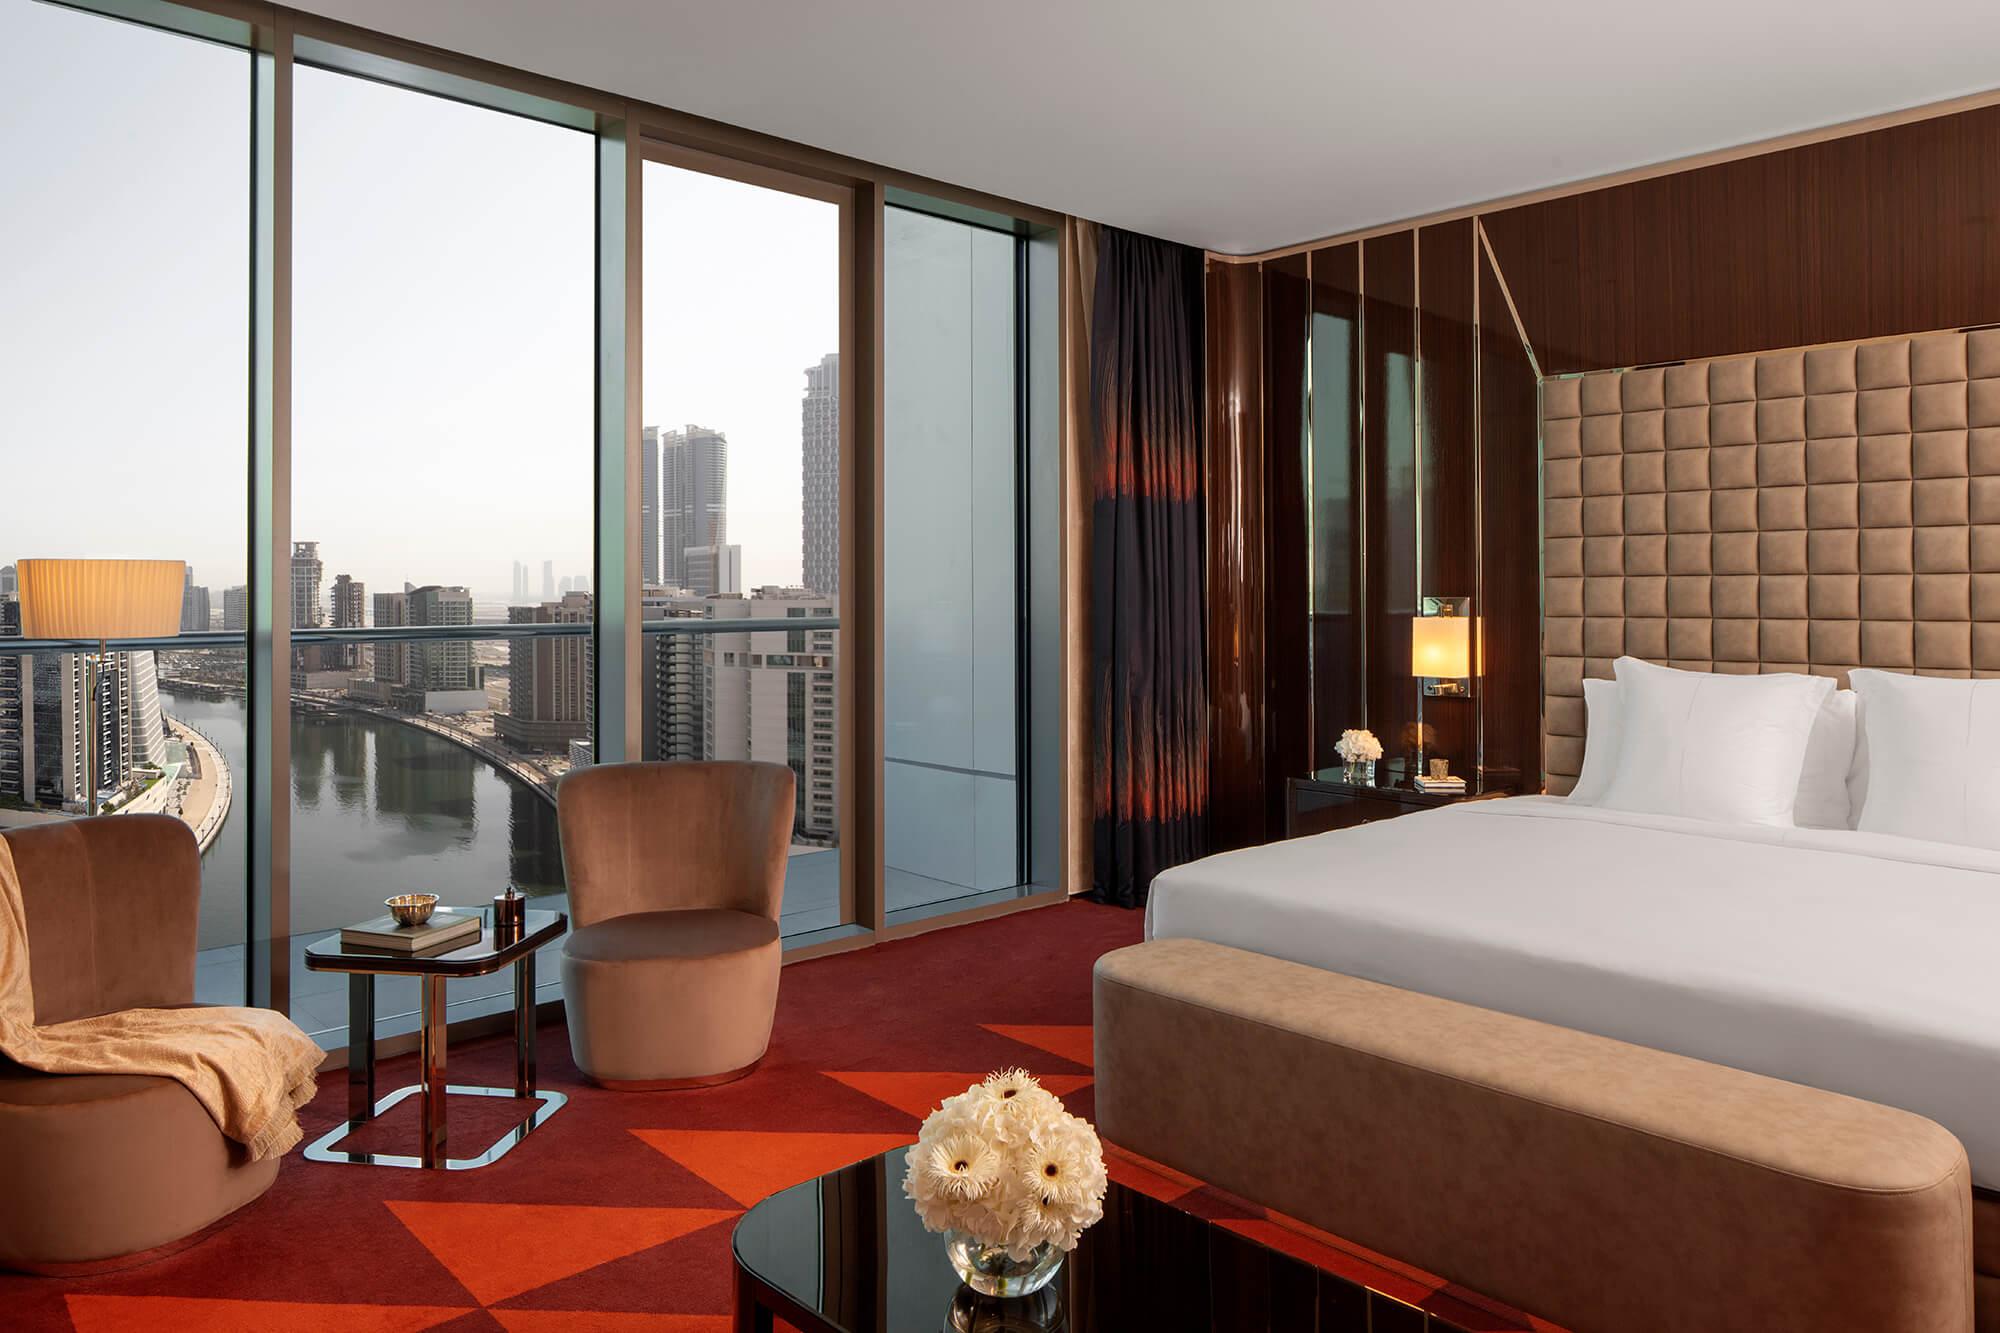 A king size bed with bedroom bench on the right, with a coffee table in the foreground, 2 armchairs and coffee table to the left next to a top to bottom window displaying high rise views of Dubai city and canals